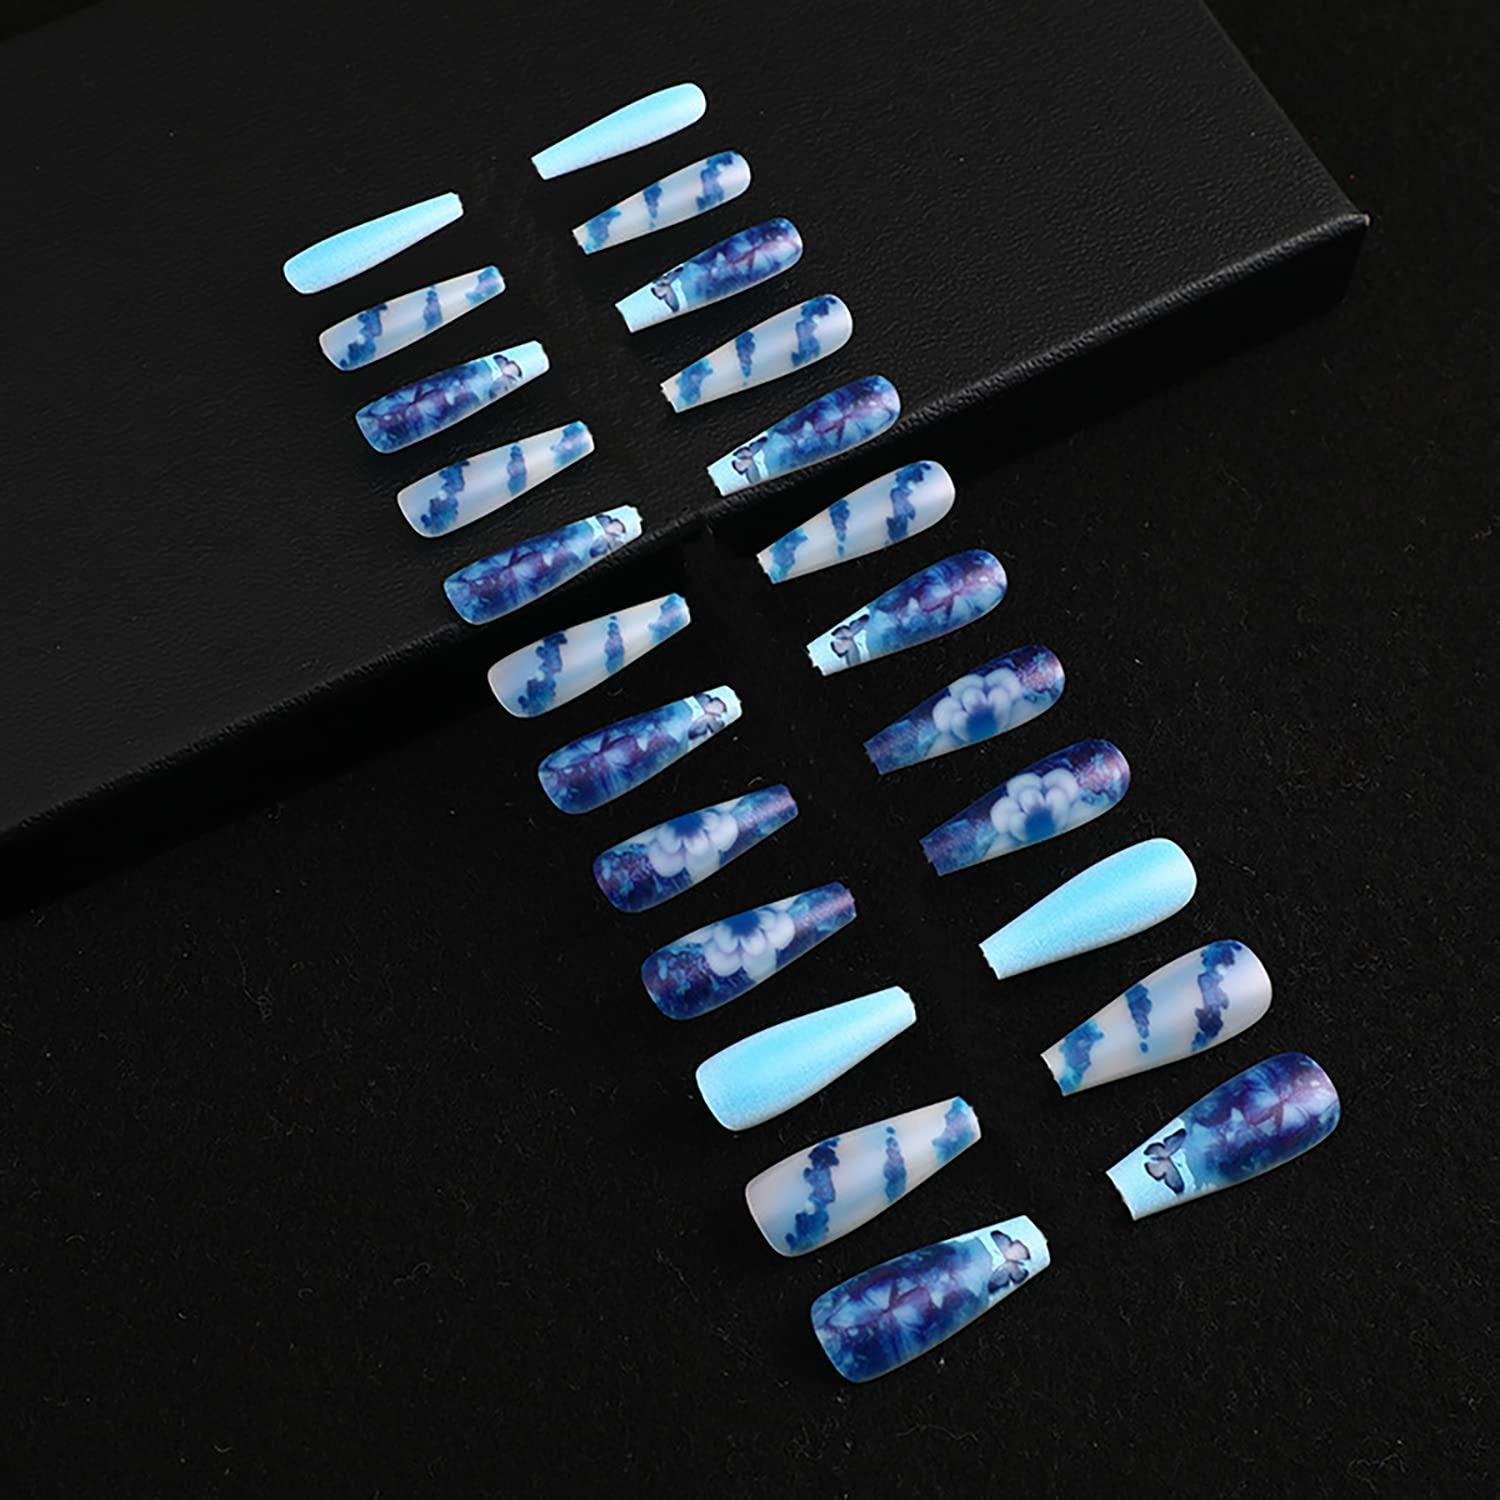 Upgrade Your Look With 24pcs Adhesive Wearable Nail Stickers, Cute